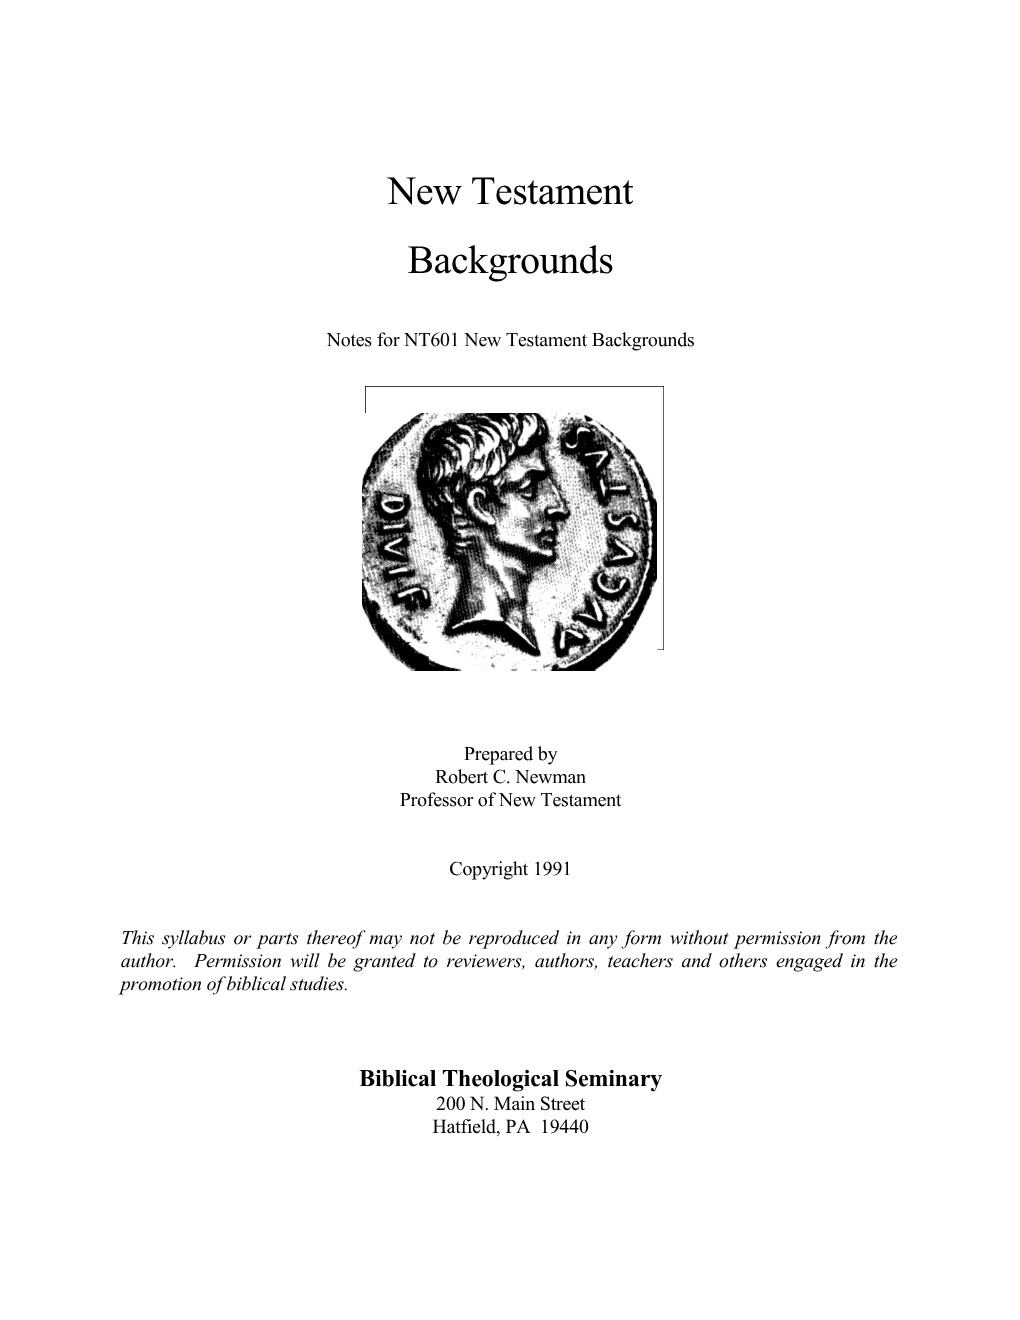 Notes for NT601 New Testament Backgrounds